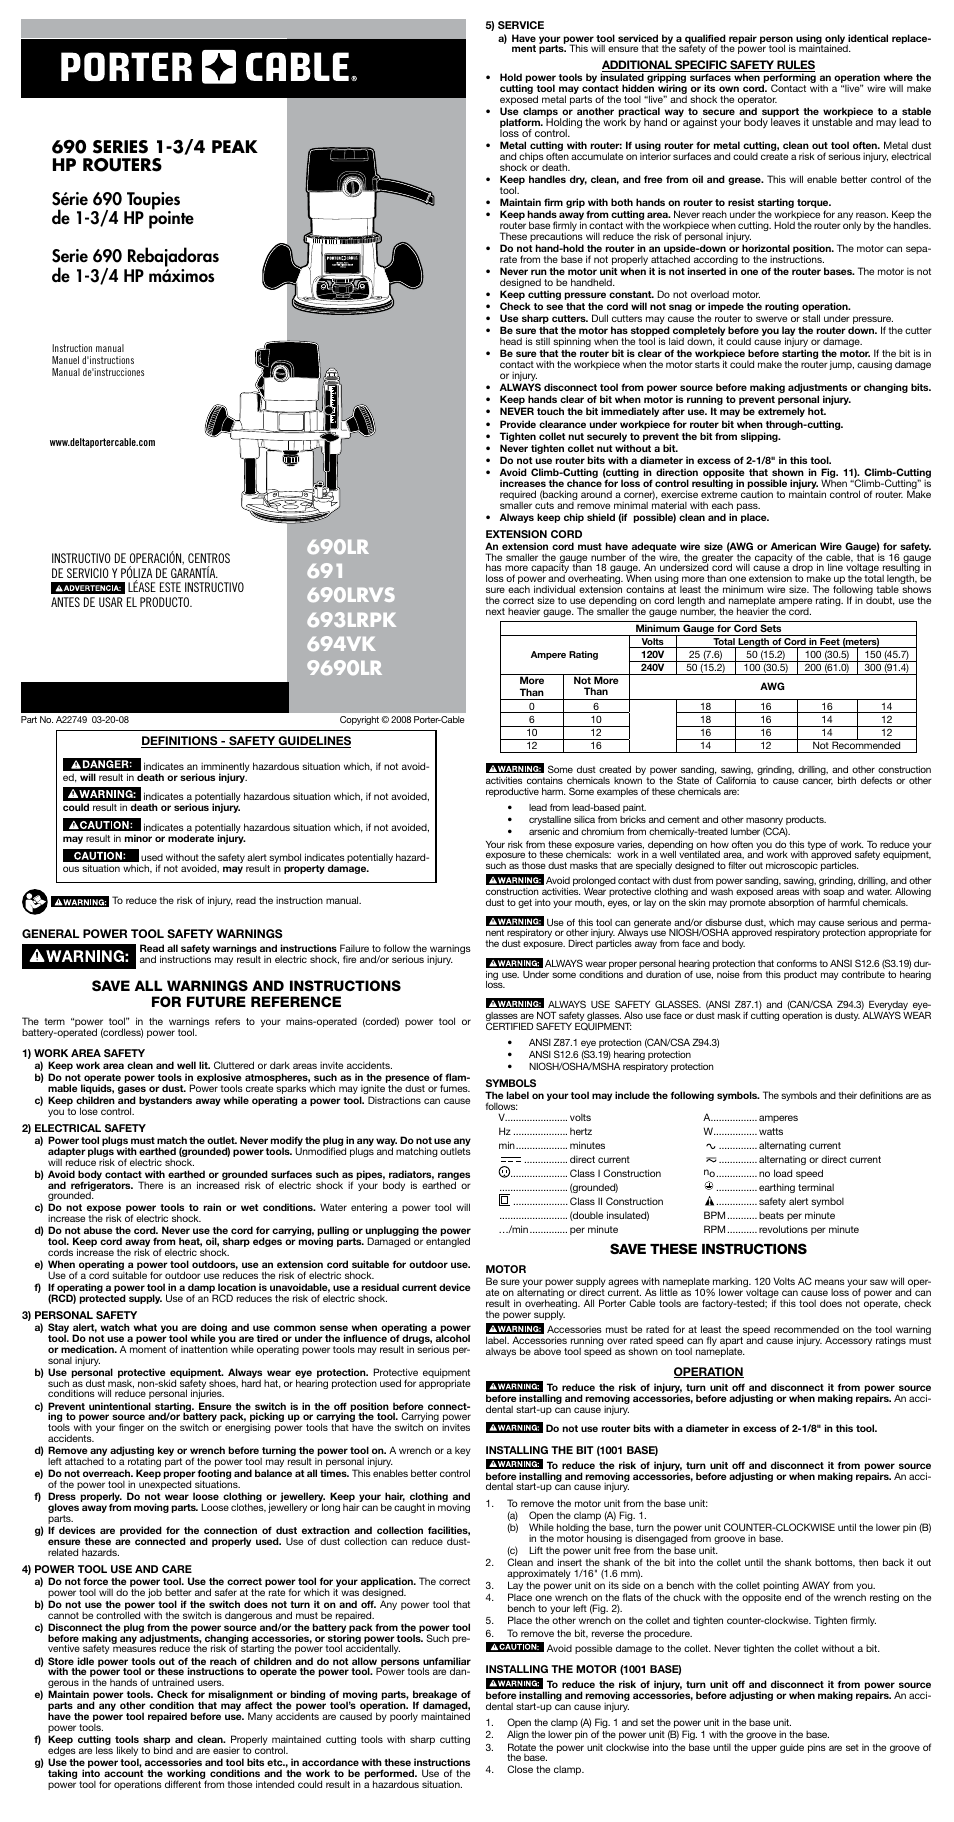 Porter-Cable 690LR User Manual | 7 pages | Also for: 690 Series, A22749